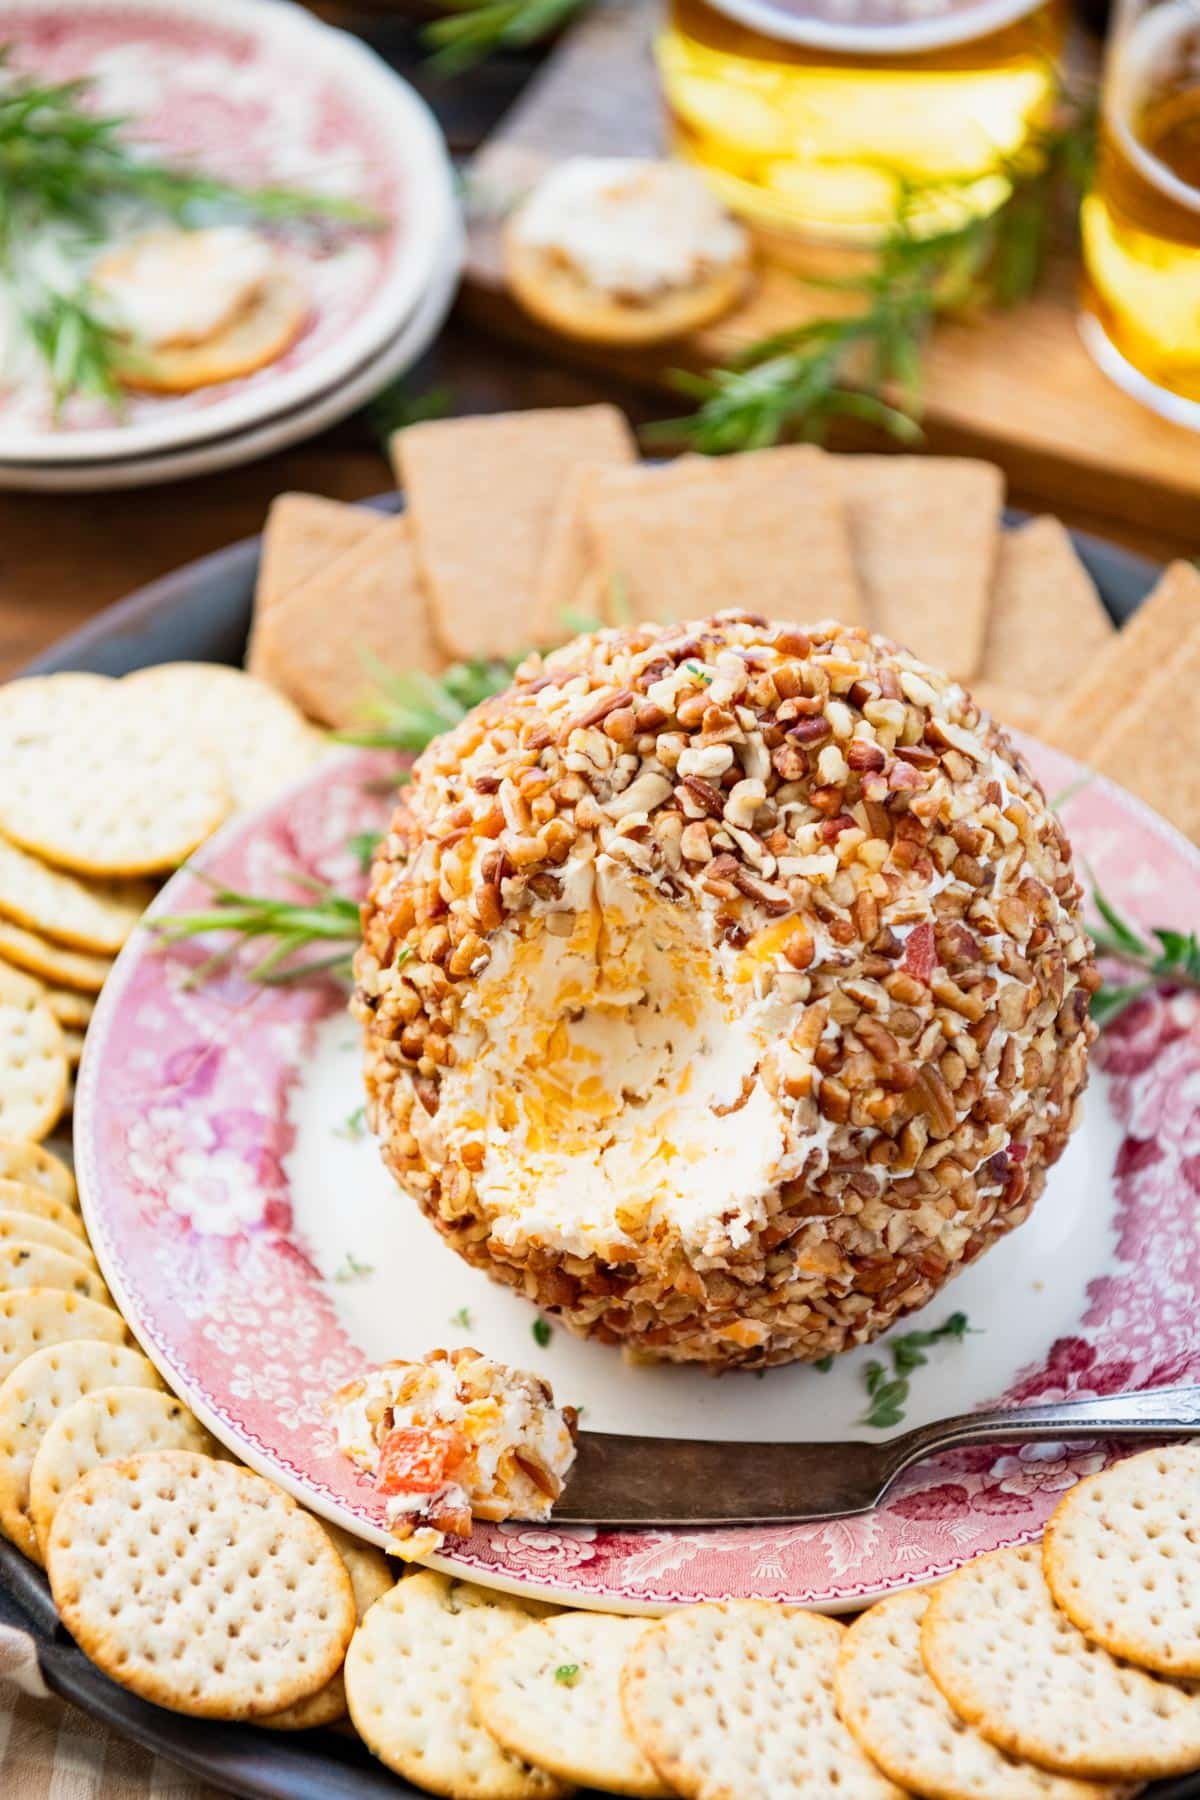 Red and white serving platter with a cheese ball and crackers.